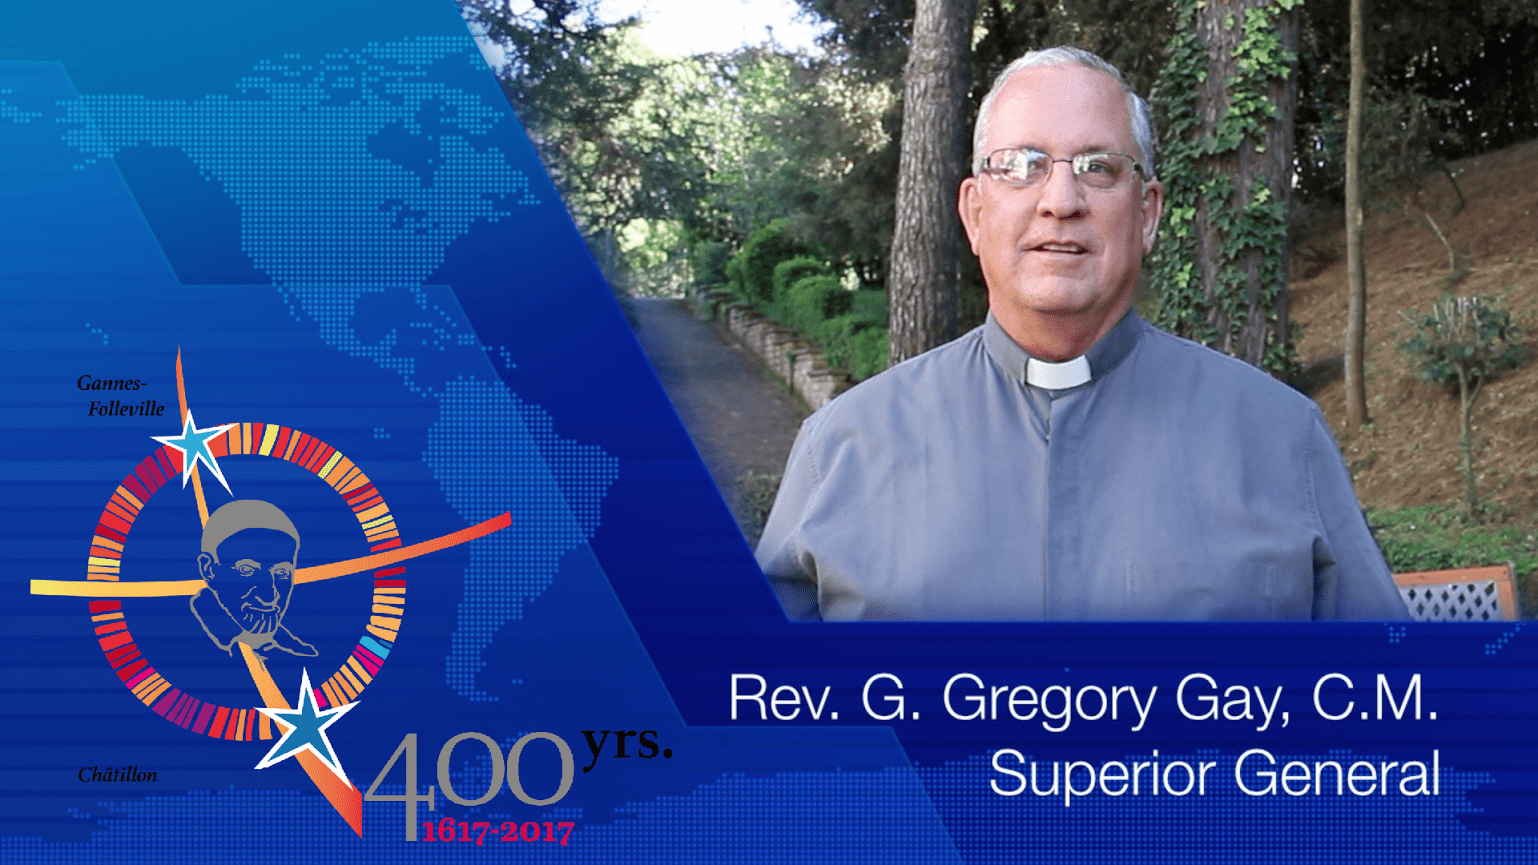 Fr. Gregory Gay, C.M.: Message for Pentecost and #famvin400